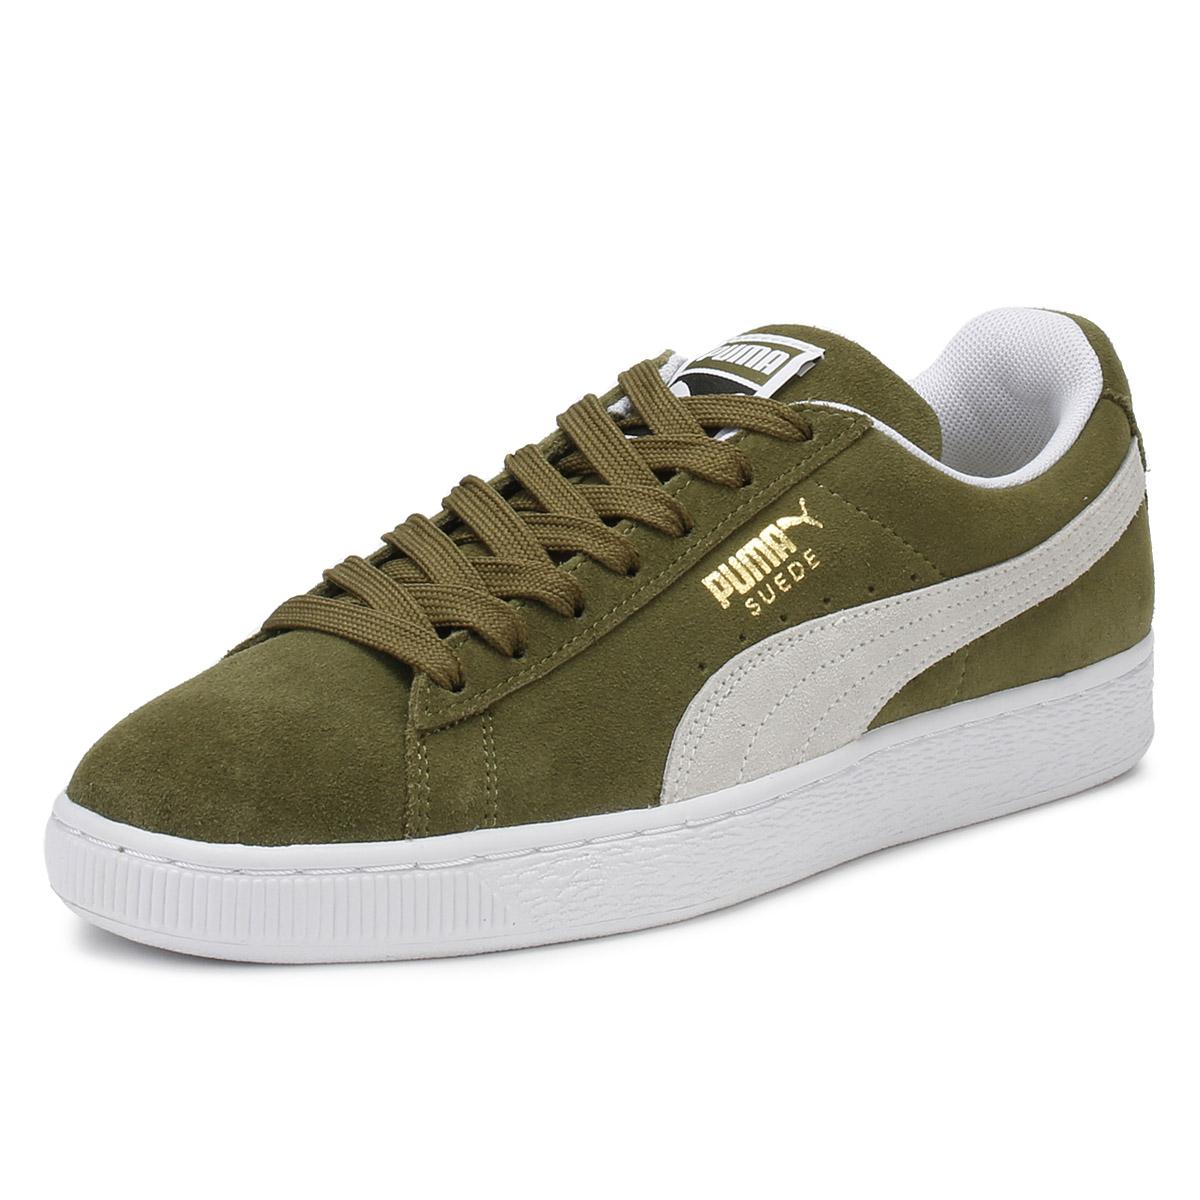 PUMA Suede Classic Trainers in Olive (Green) - Lyst